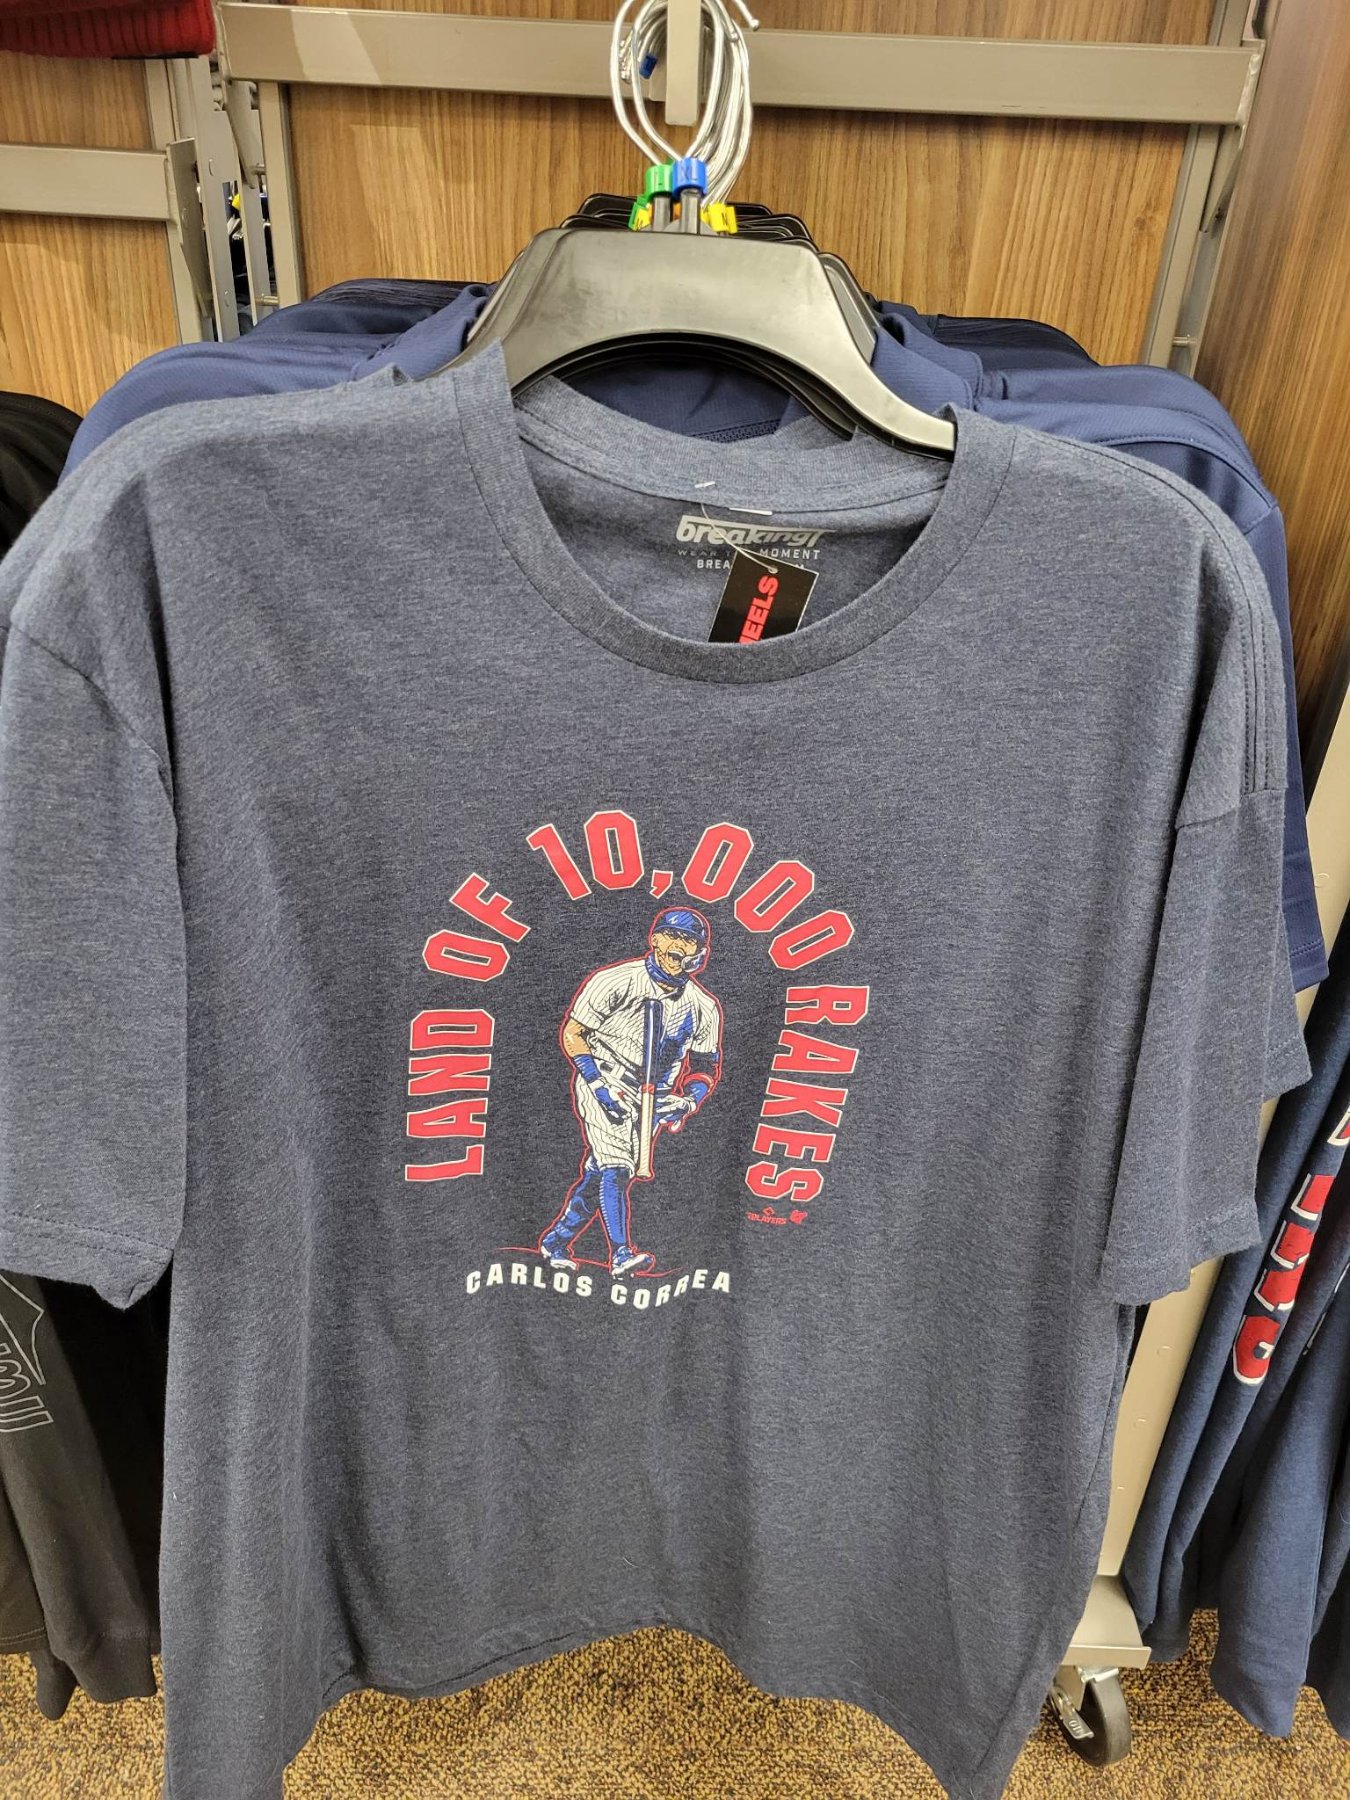 Twins Fans Scoop Up Clearance Apparel After Correa Re-Signs With